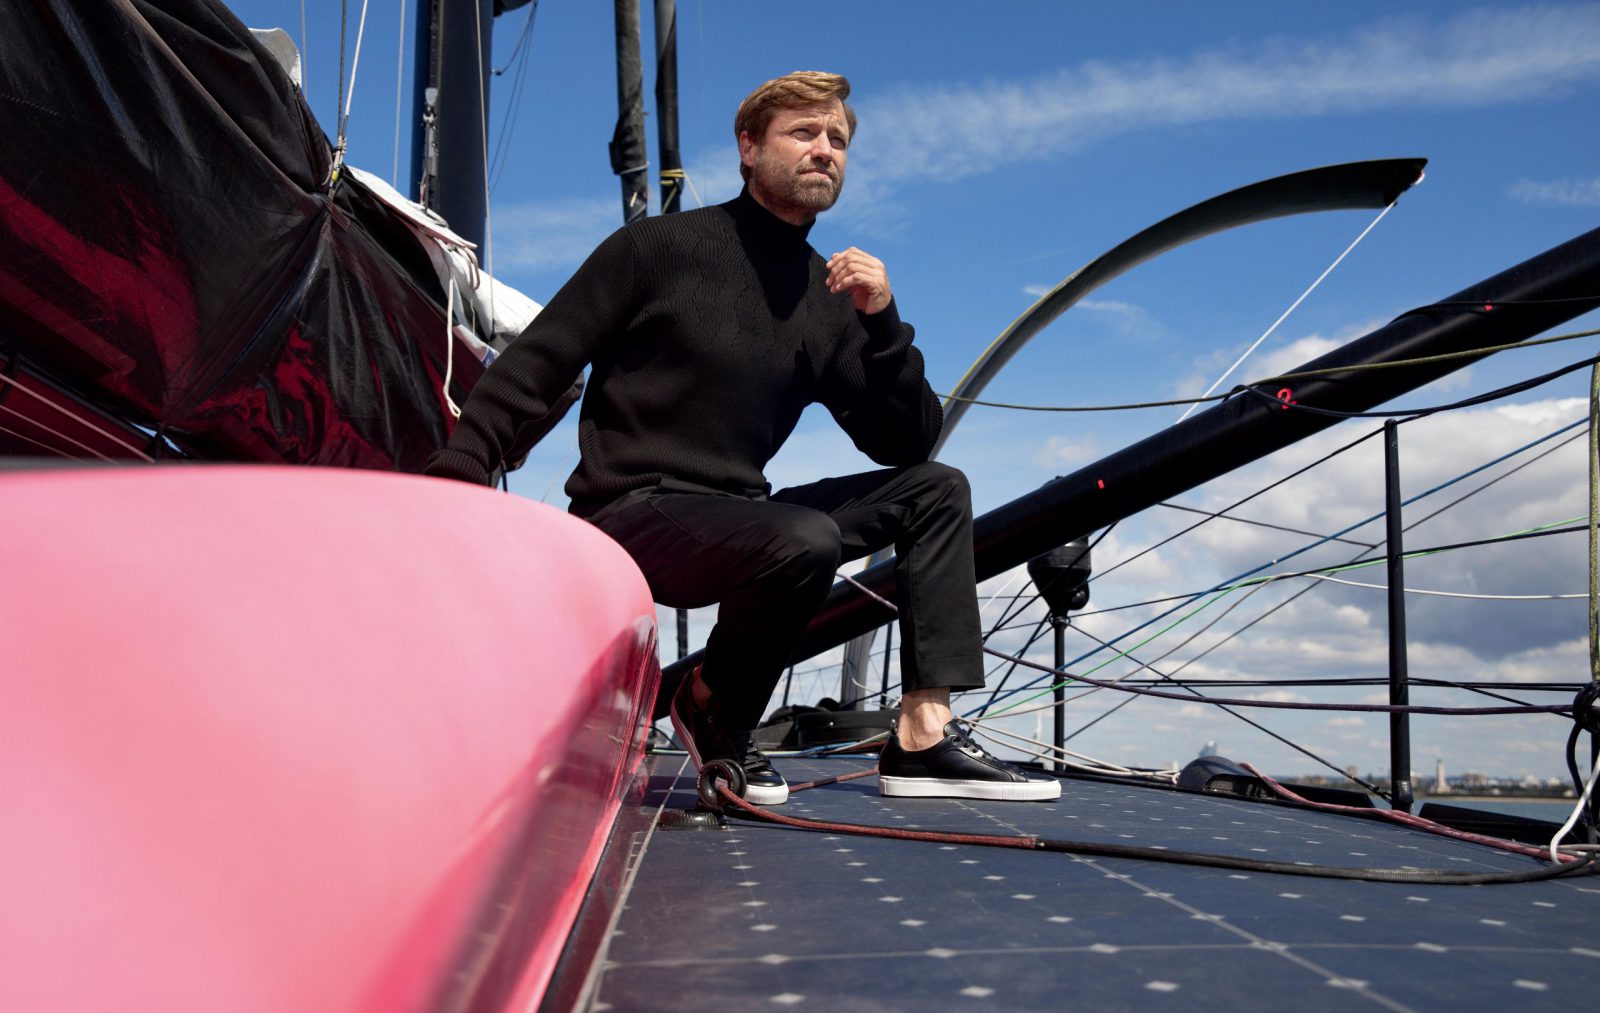 Fair winds to Fairview friend Alex Thomson as he prepares to set sail in the 2020 Vendée Globe